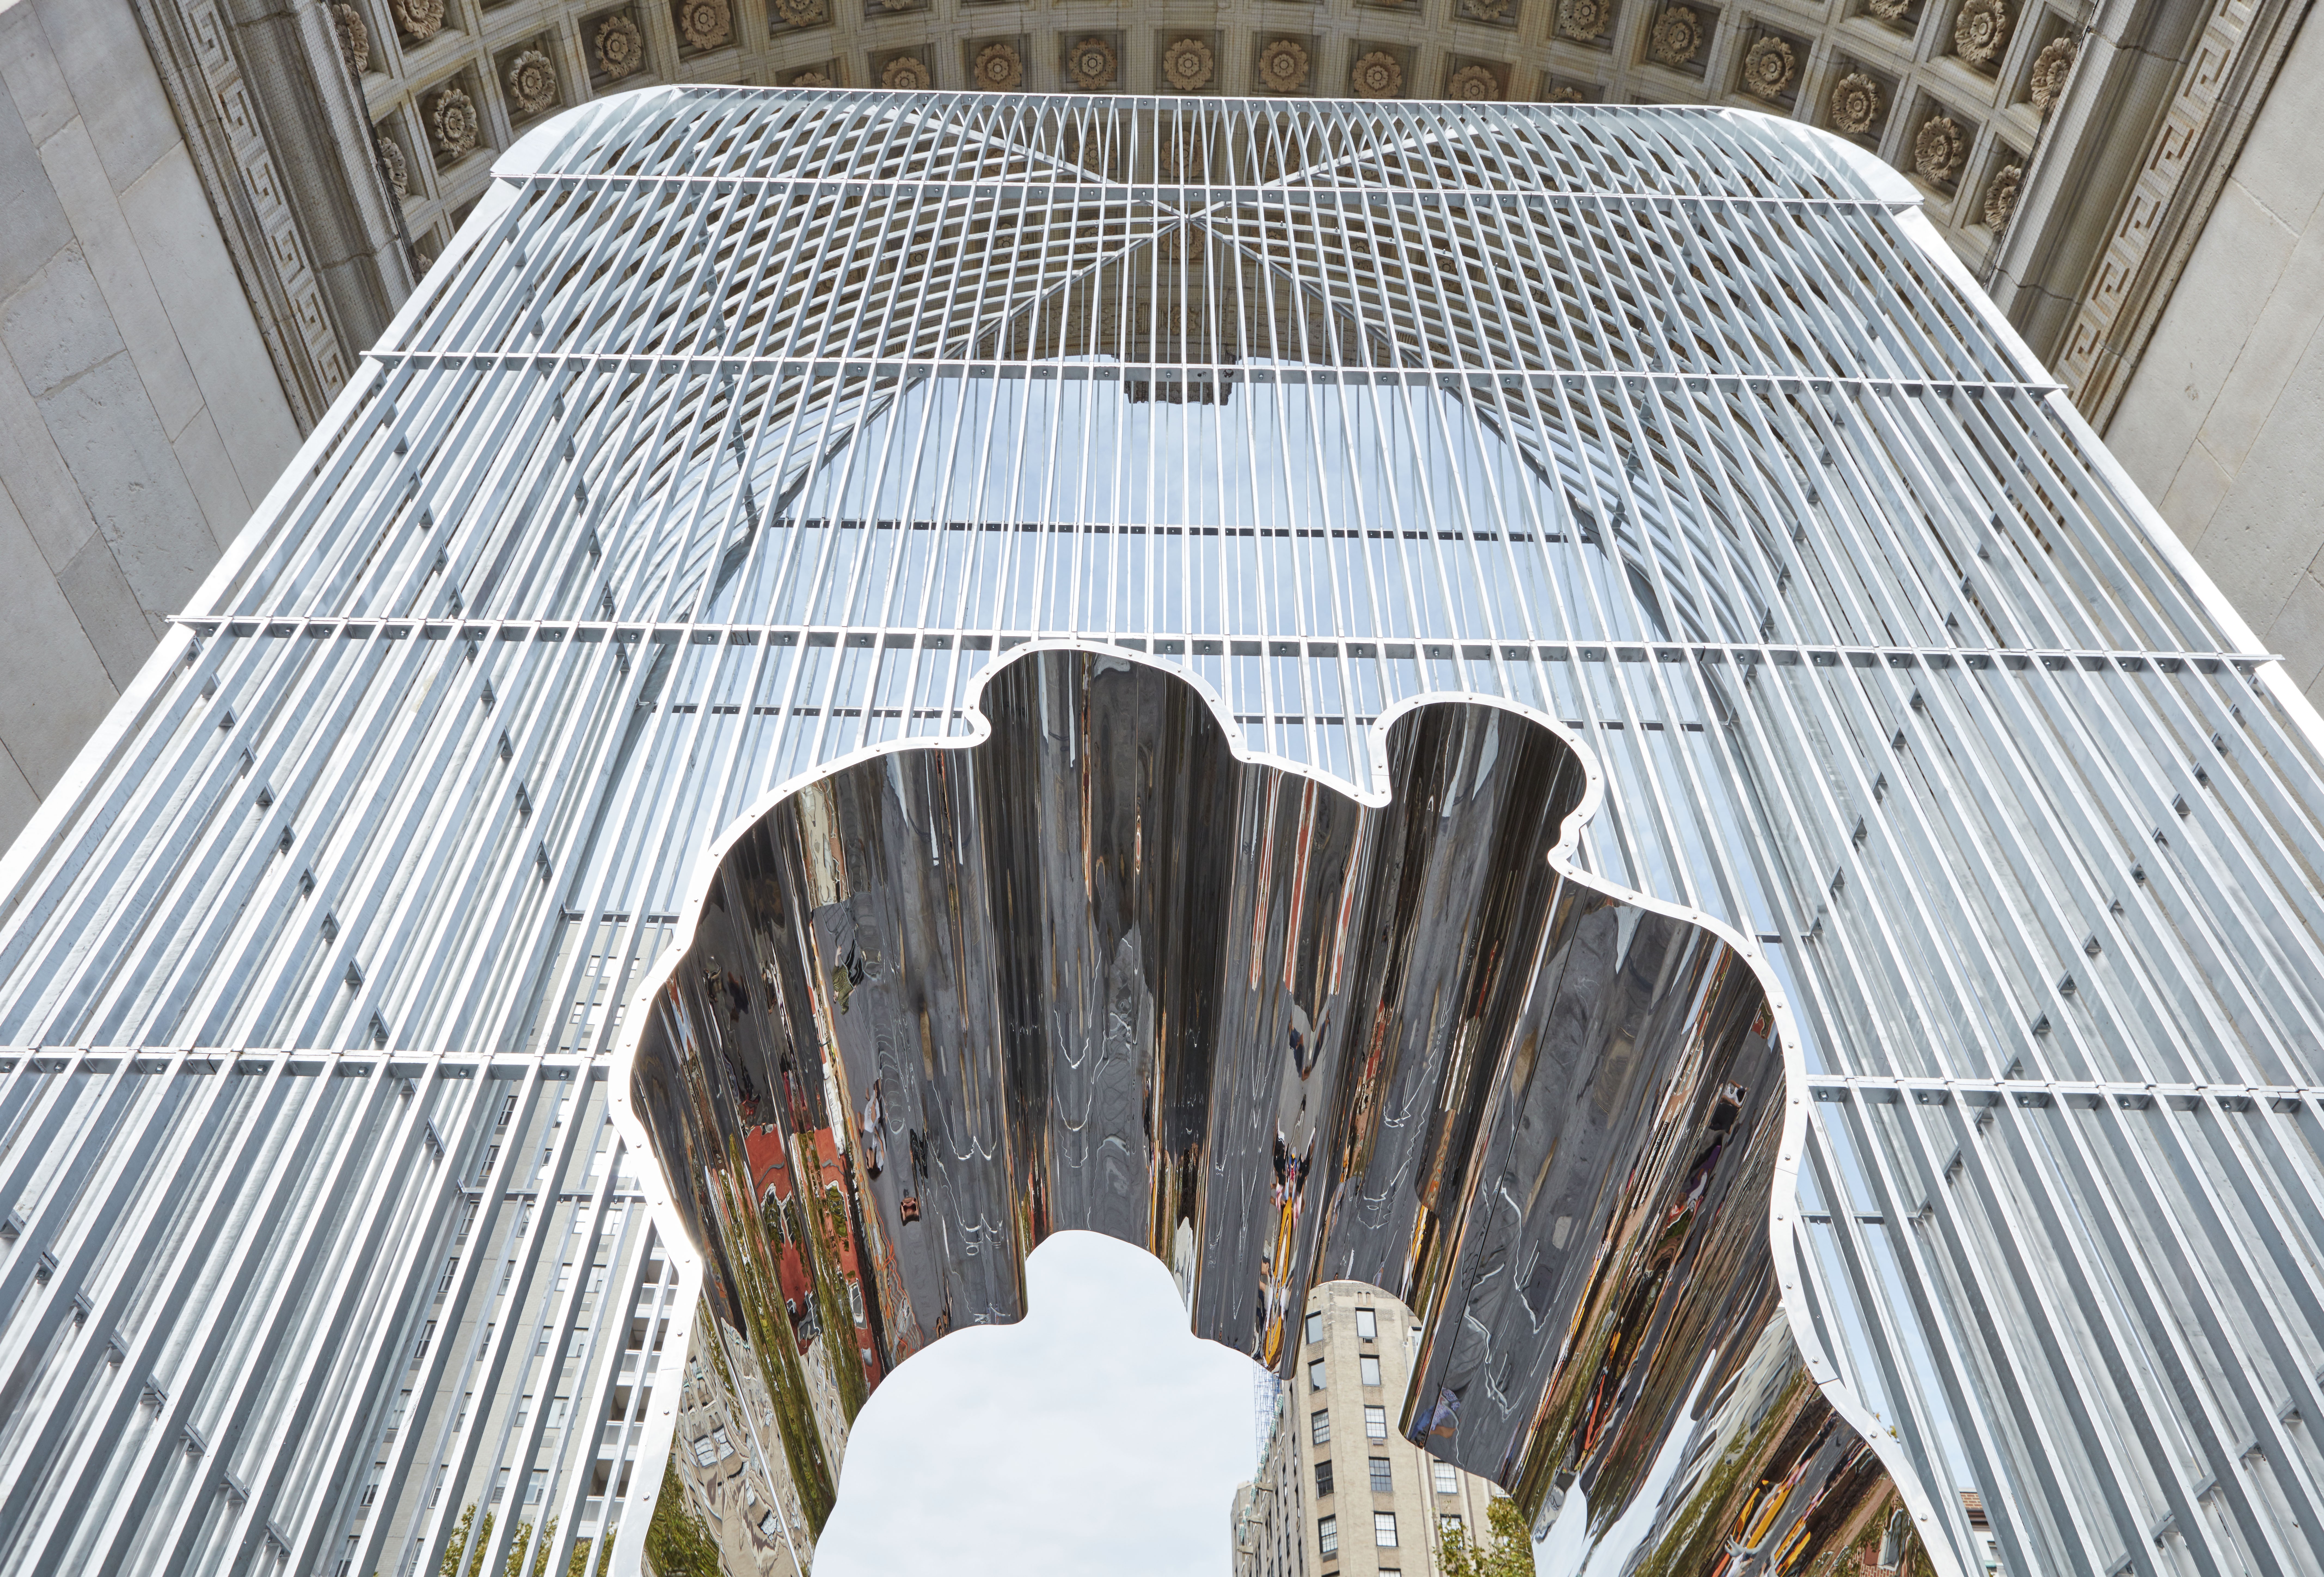 UAP worked on an exhibition in New York, ‘Good Fences Make Good Neighbours’, with Chinese artist Ai Weiwei. Photo: Ai Weiwei Studio / Jason Wyche